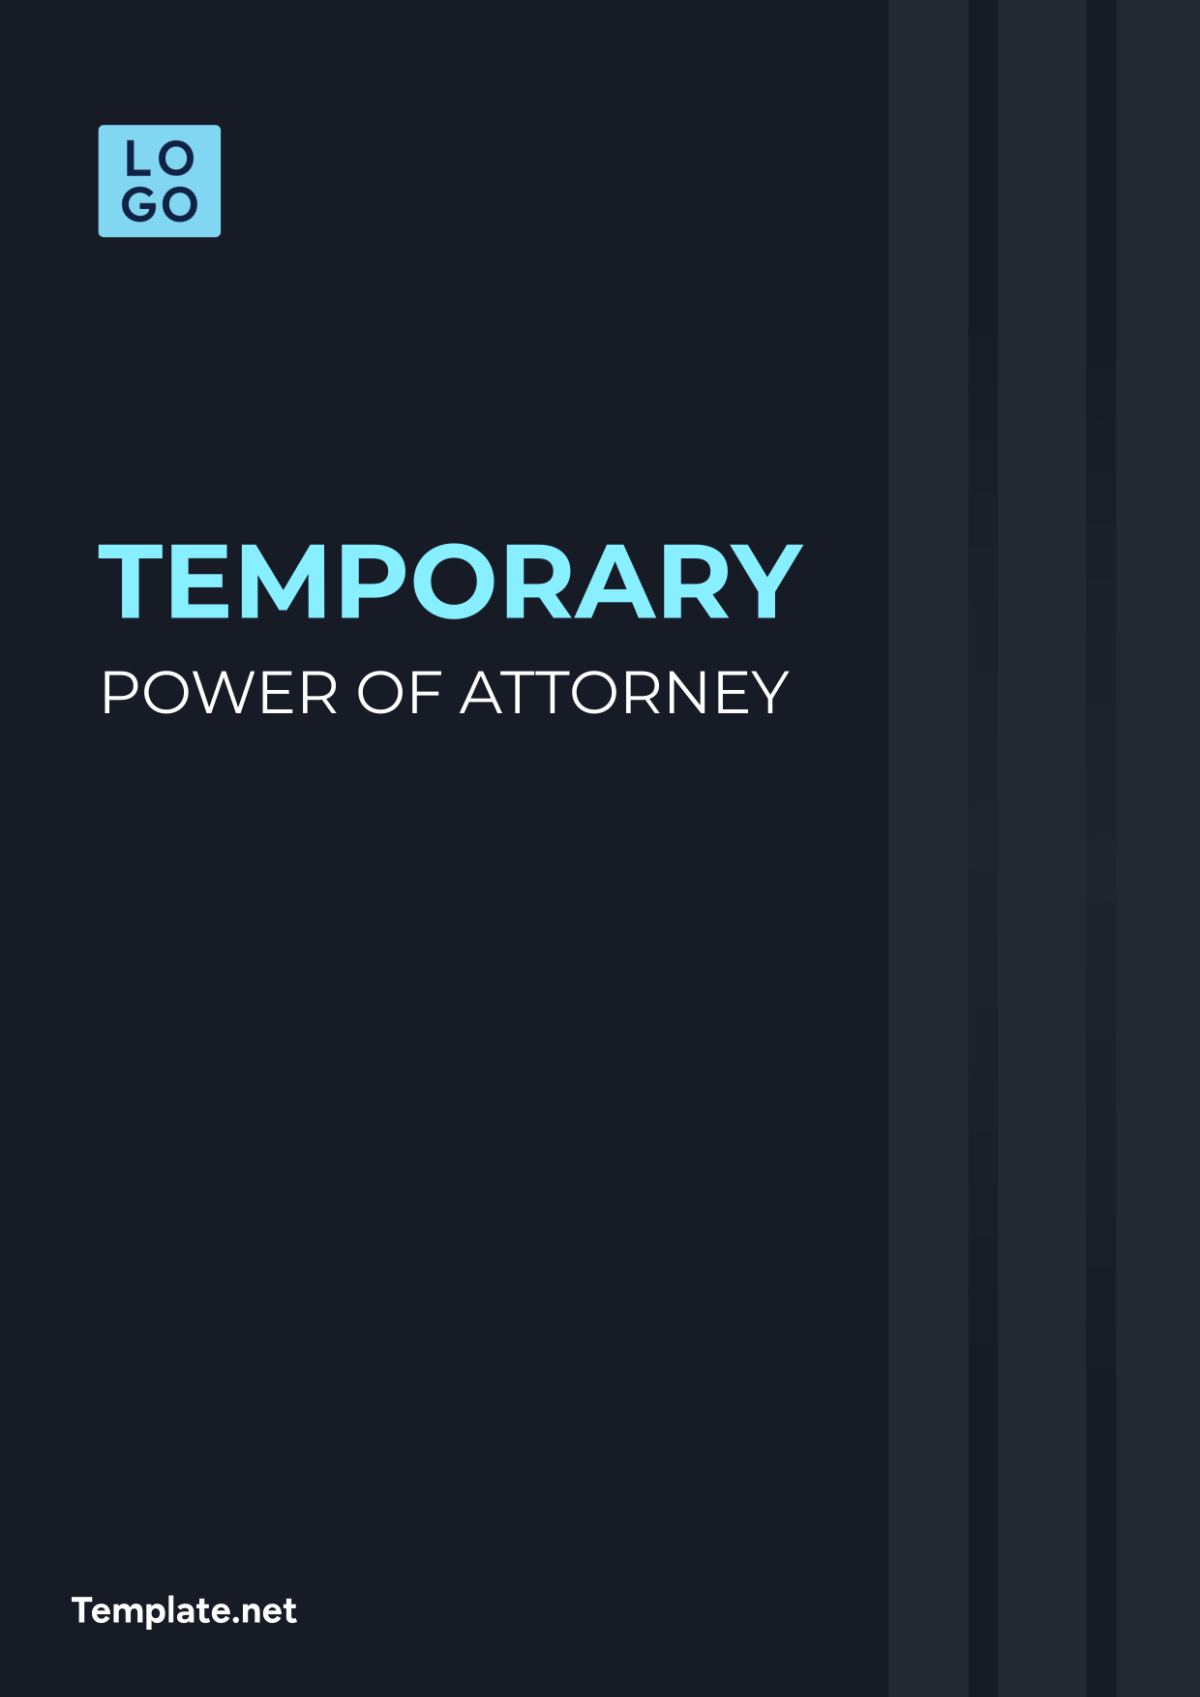 Temporary Power of Attorney Cover Page